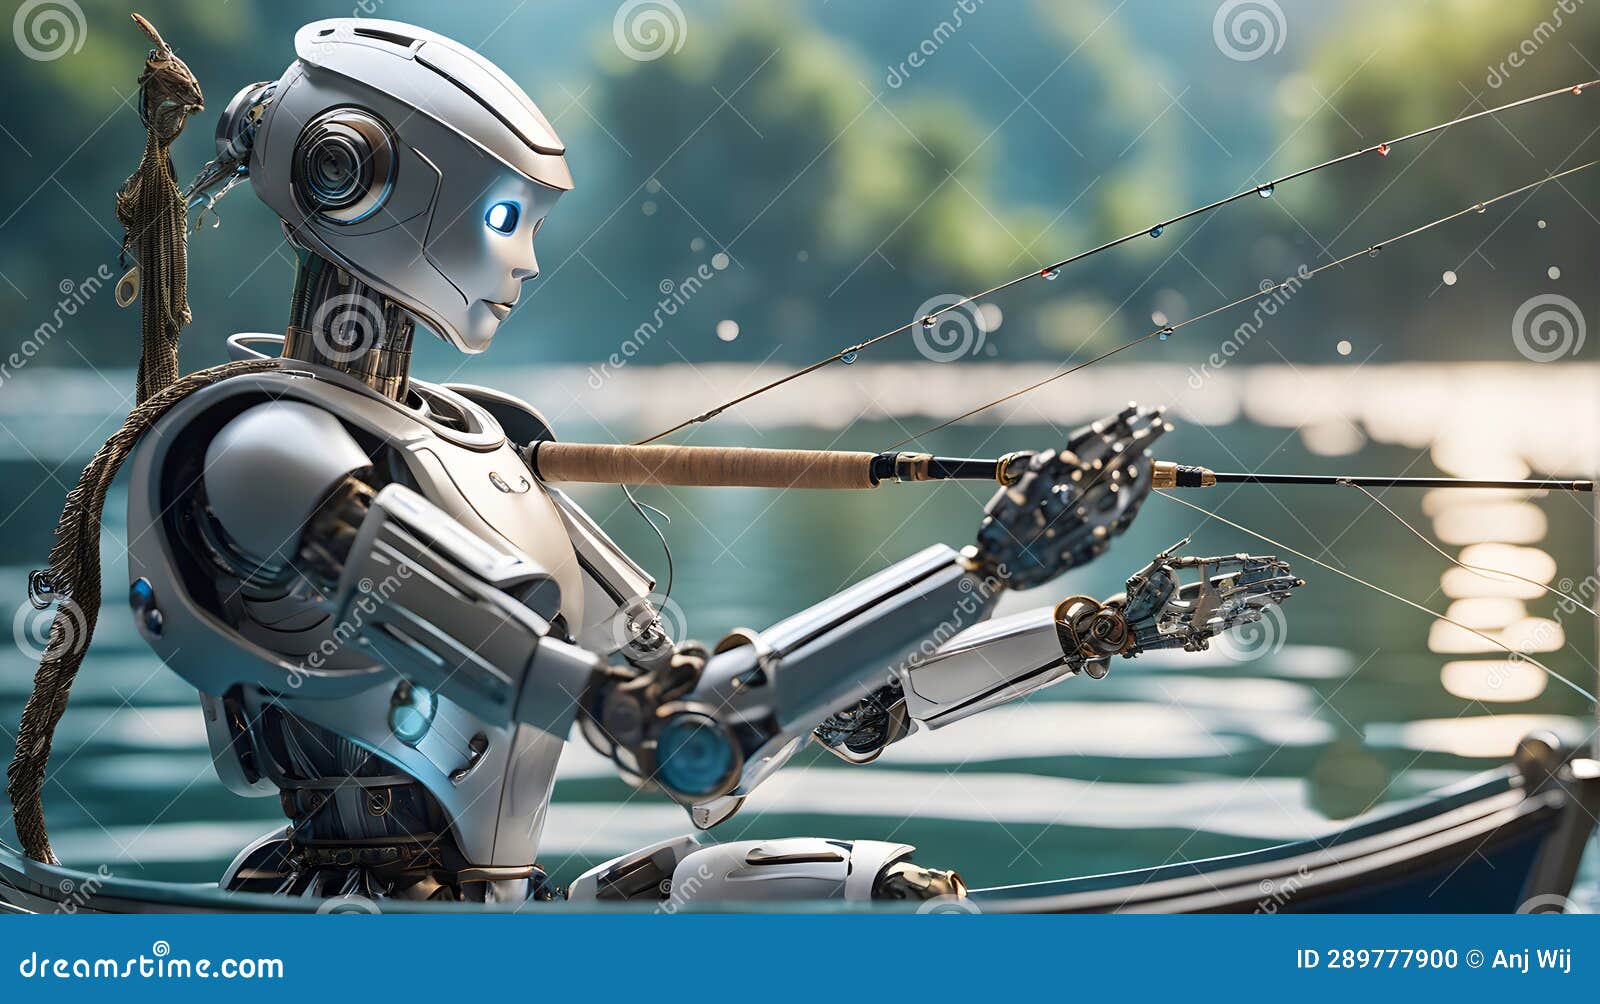 The Robot is Using a Fishing Rod from the Boat Stock Illustration